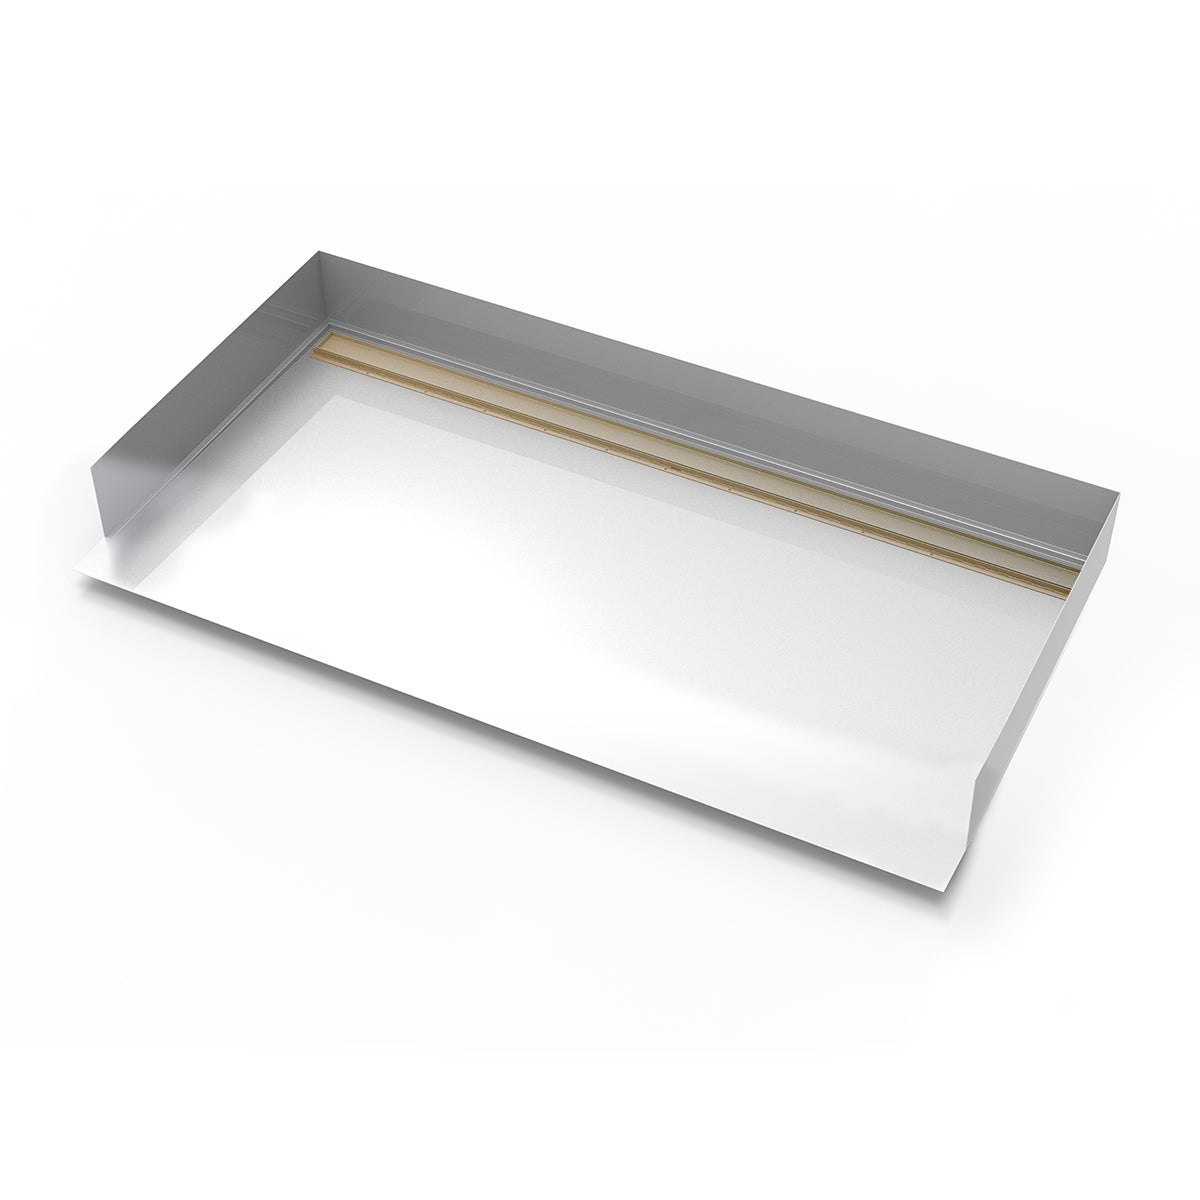 Infinity Drain 30"x 60" Curbless Stainless Steel Shower Base with Back Wall Tile Insert Linear Drain location